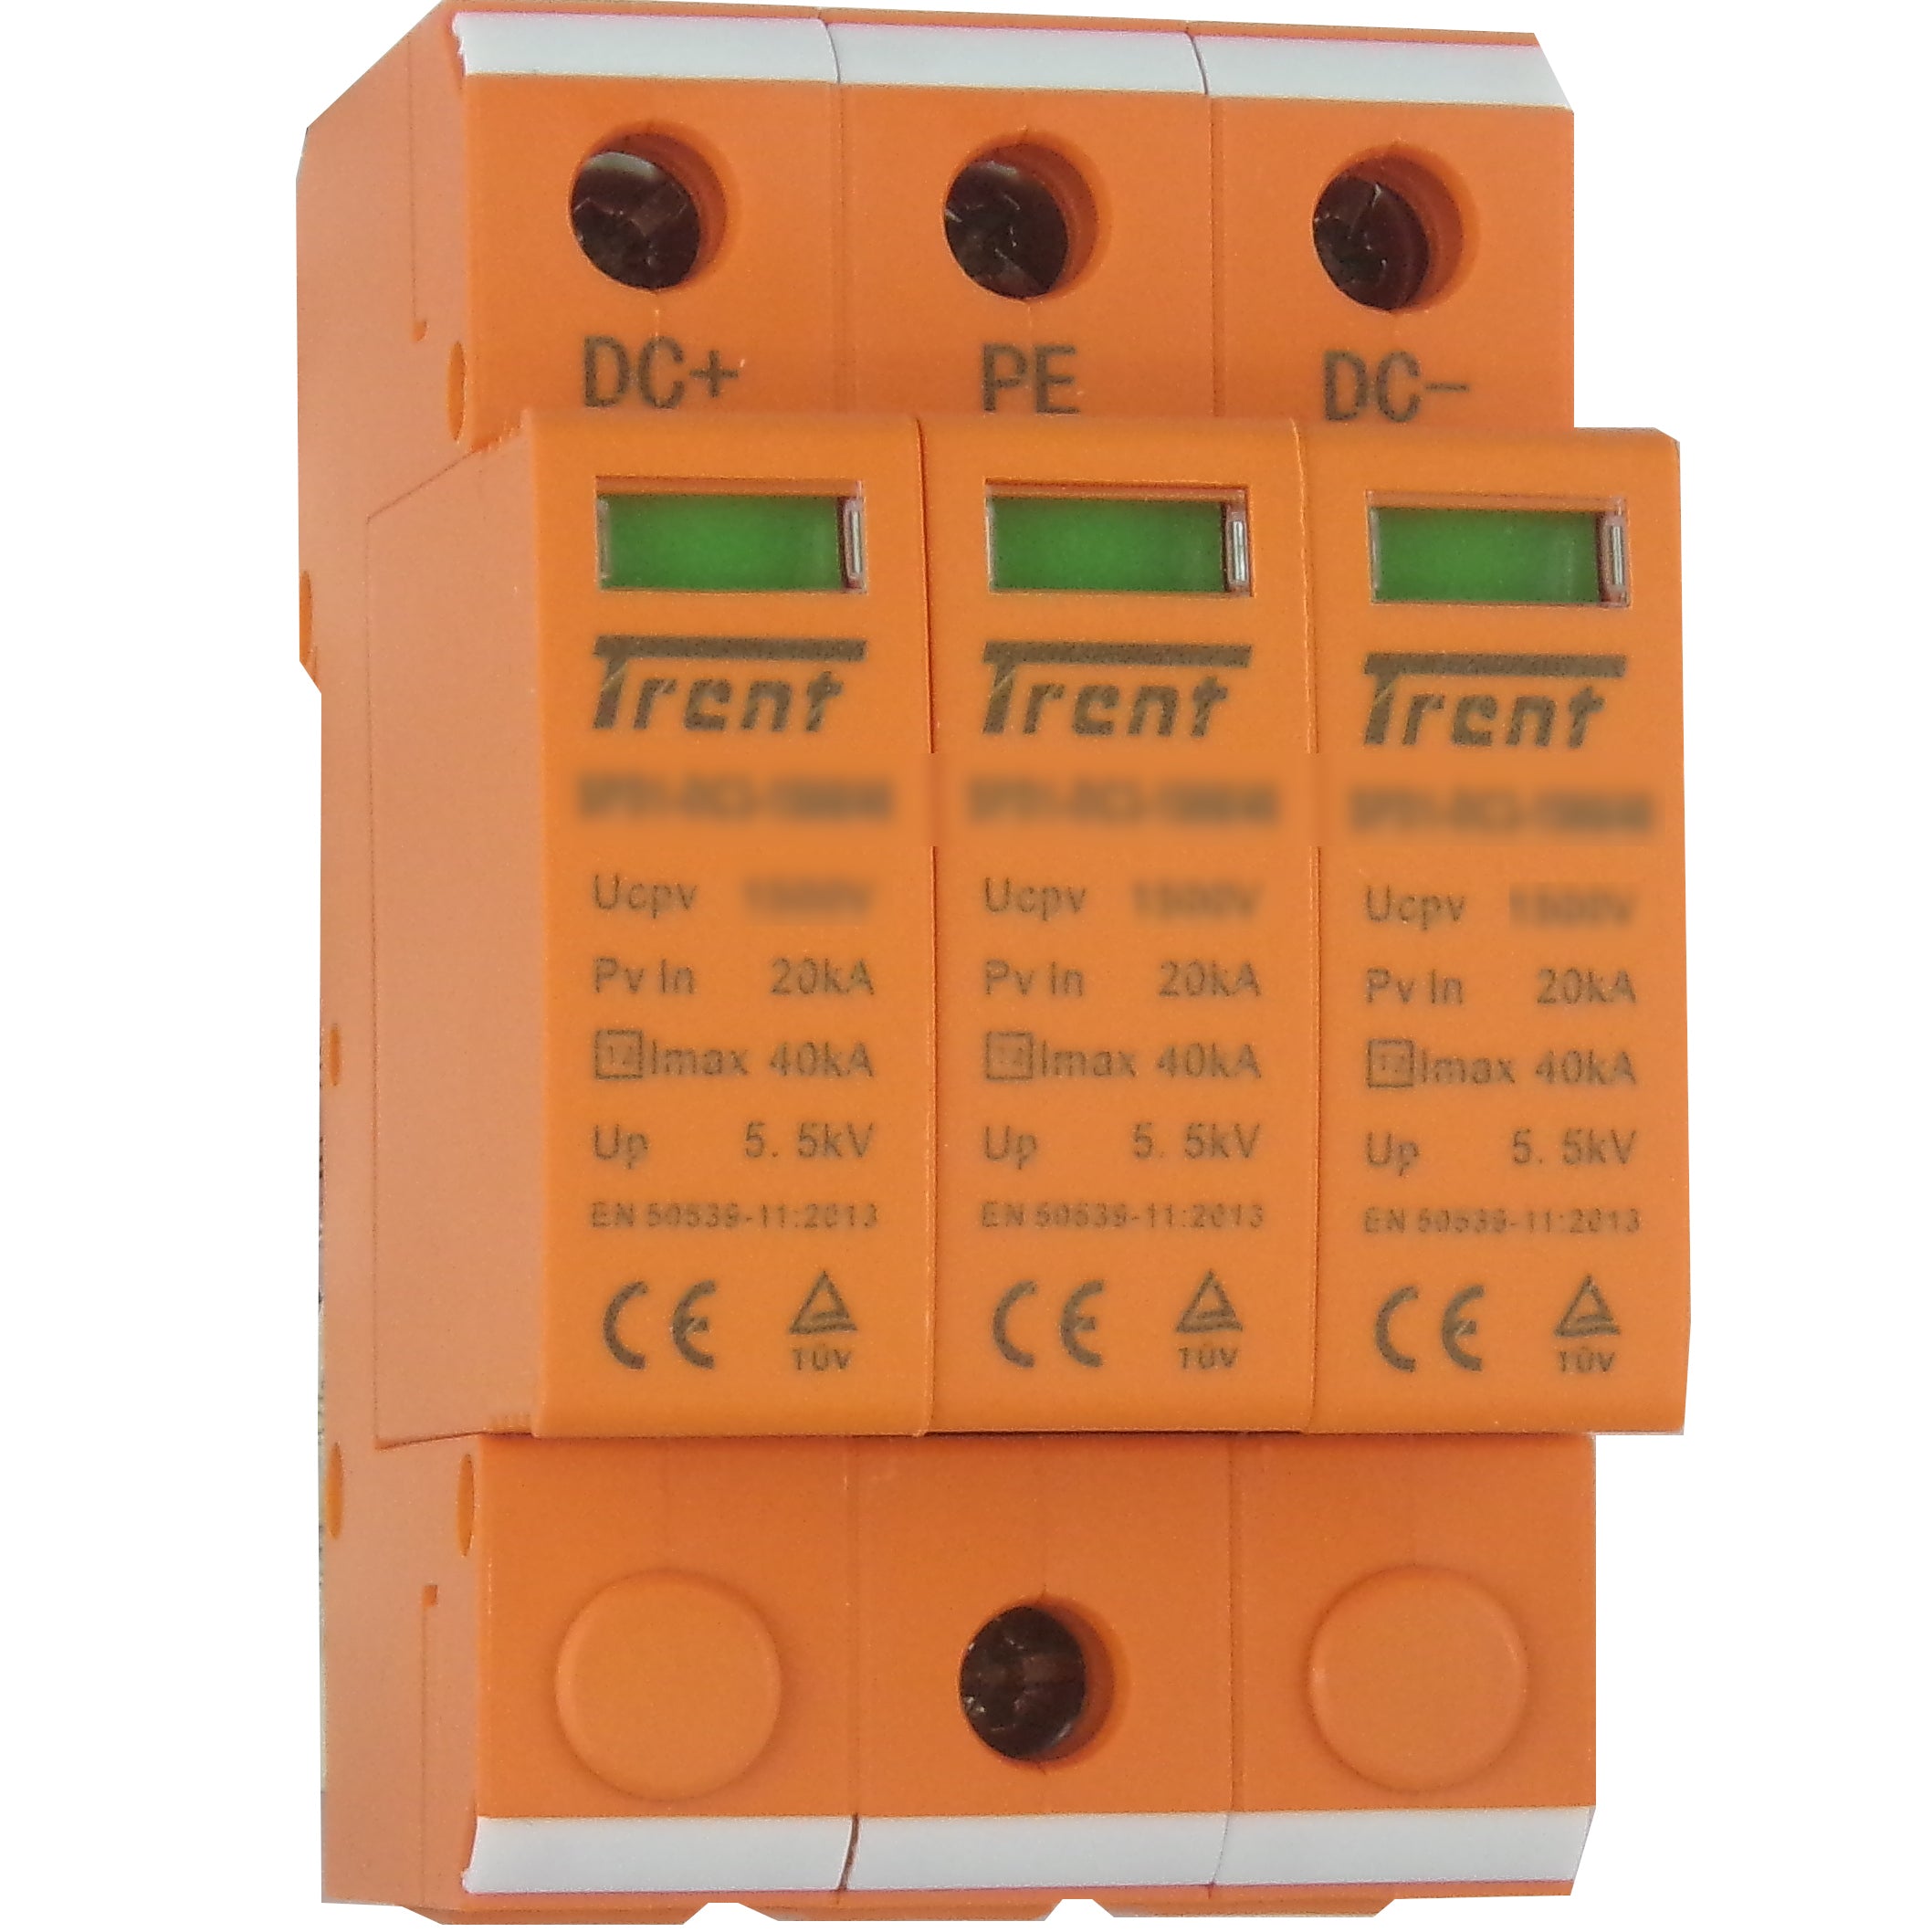 SPD1-DC/3-750/40, 750VDC Surge Protection Device for Photovoltaic Systems, Type 2 40kA